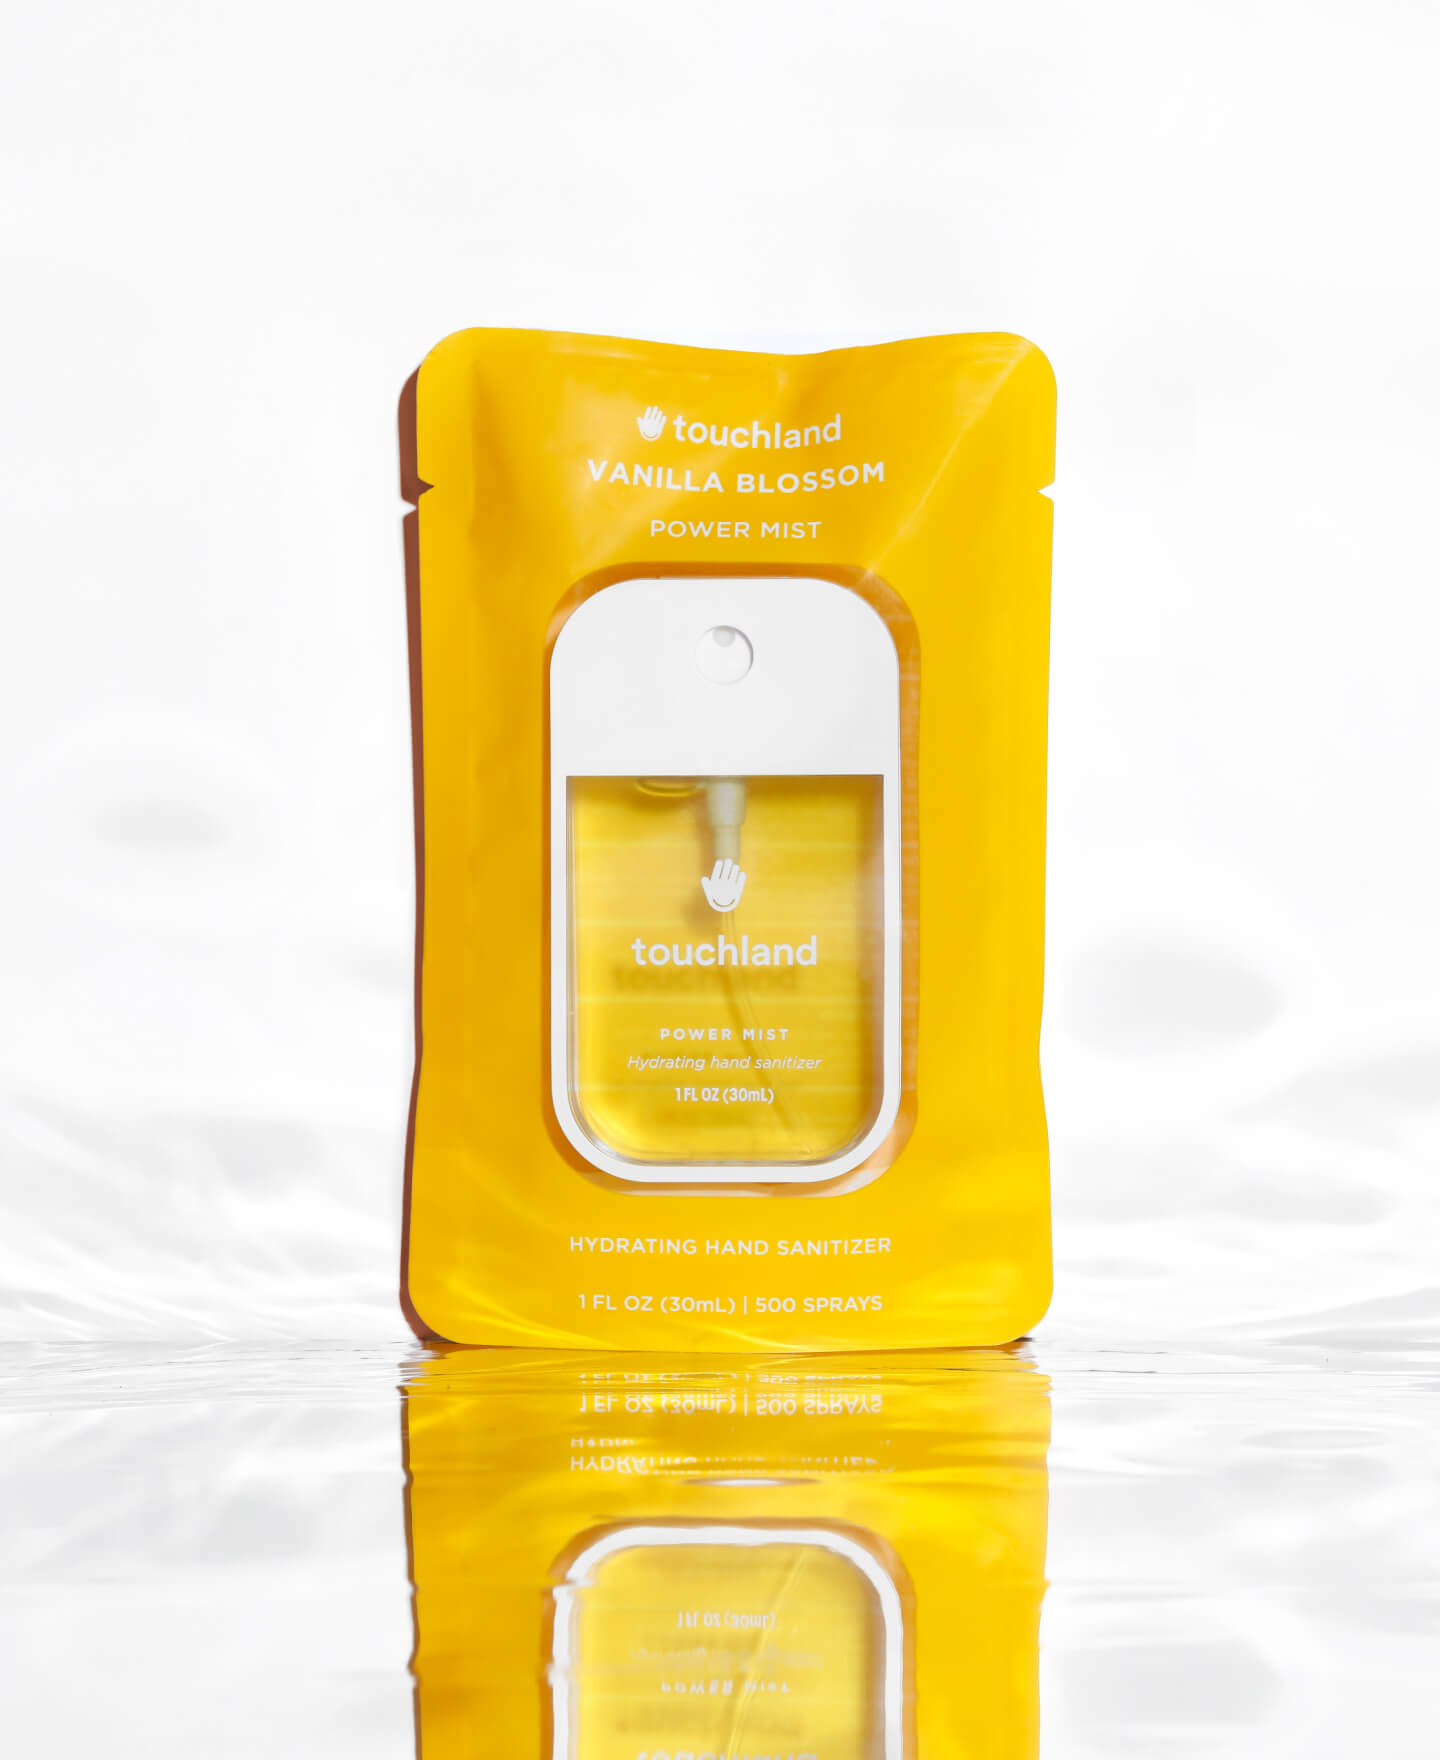 Power Mist hydrating hand sanitizer Vanilla Blossom scented inside yellow packaging standing on a mirror floor with water